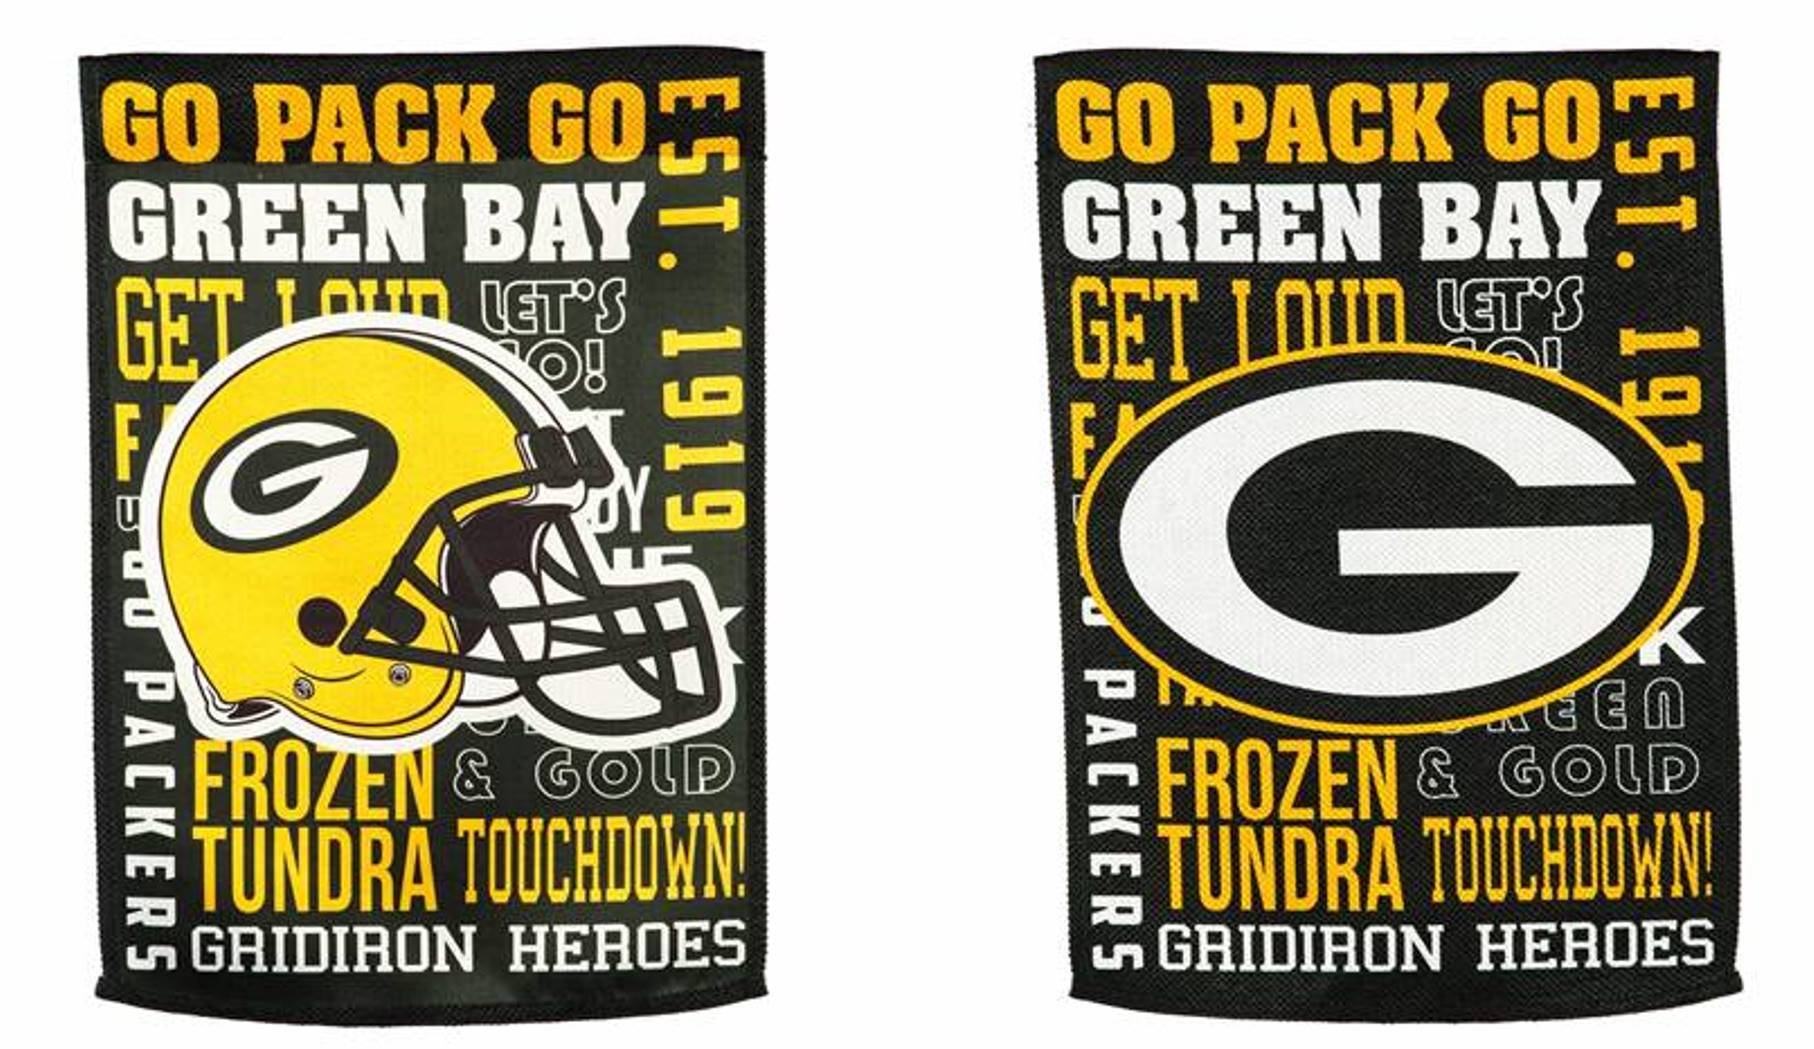 Green Bay Packers Premium Double Sided Banner Flag 28x44 Inch Fan Rules Design Indoor Outdoor